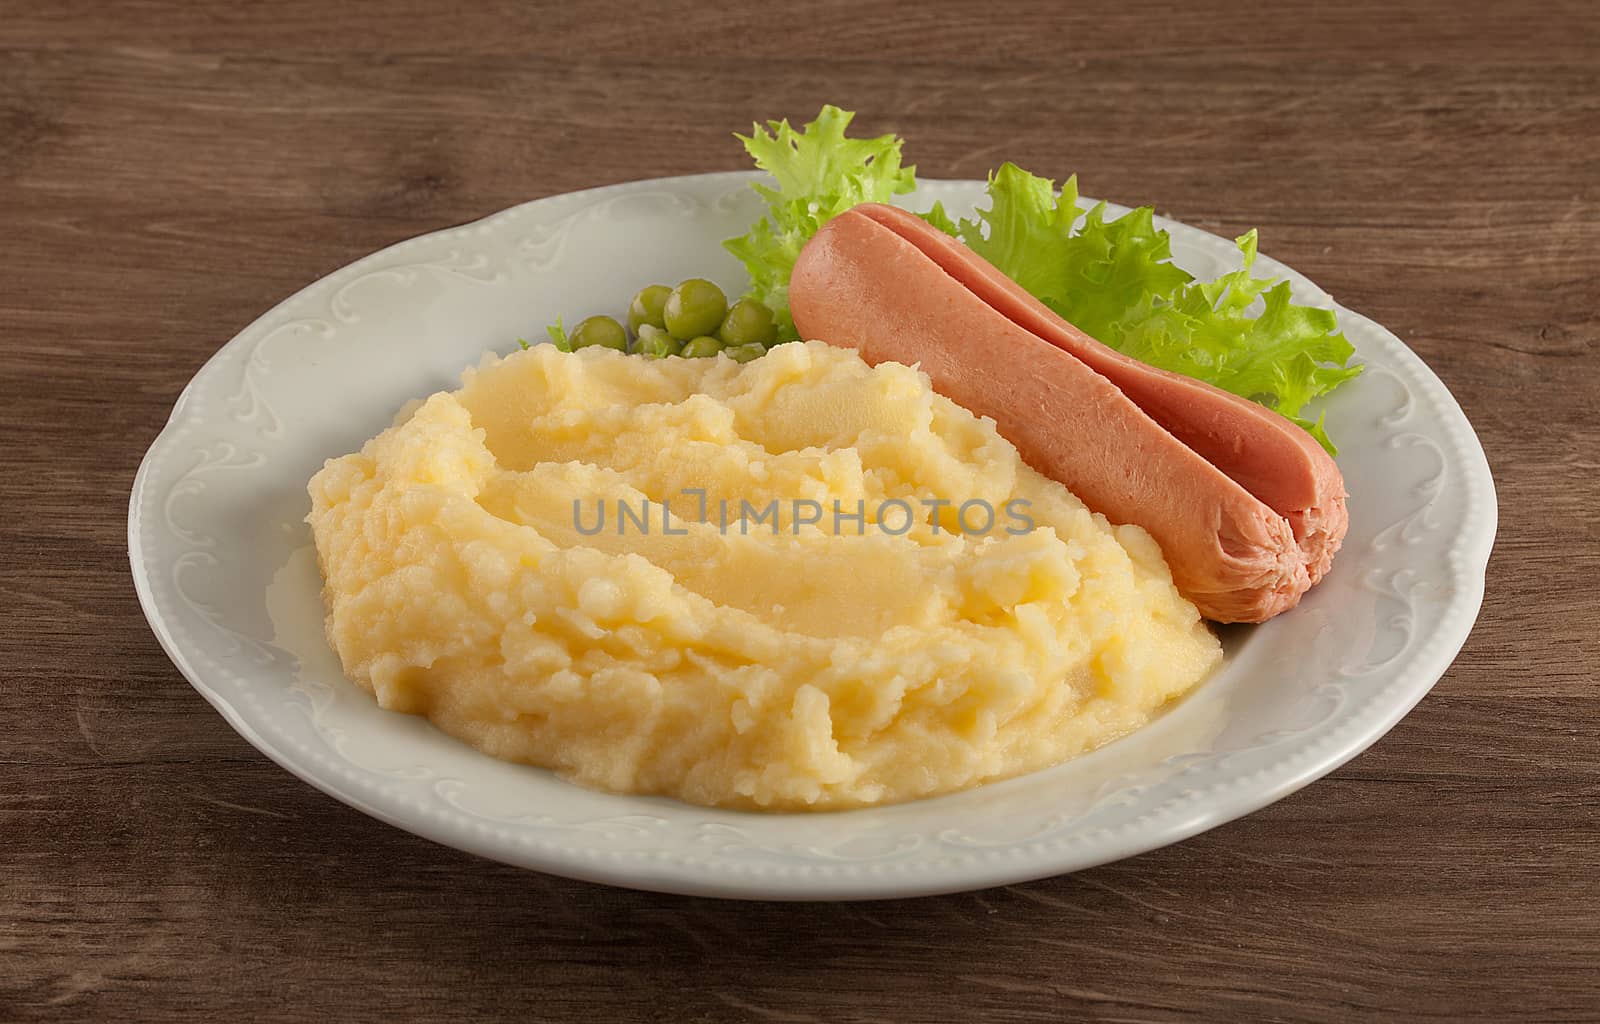 Mashed potatoes with green lettuce, peas and small sausage by Angorius